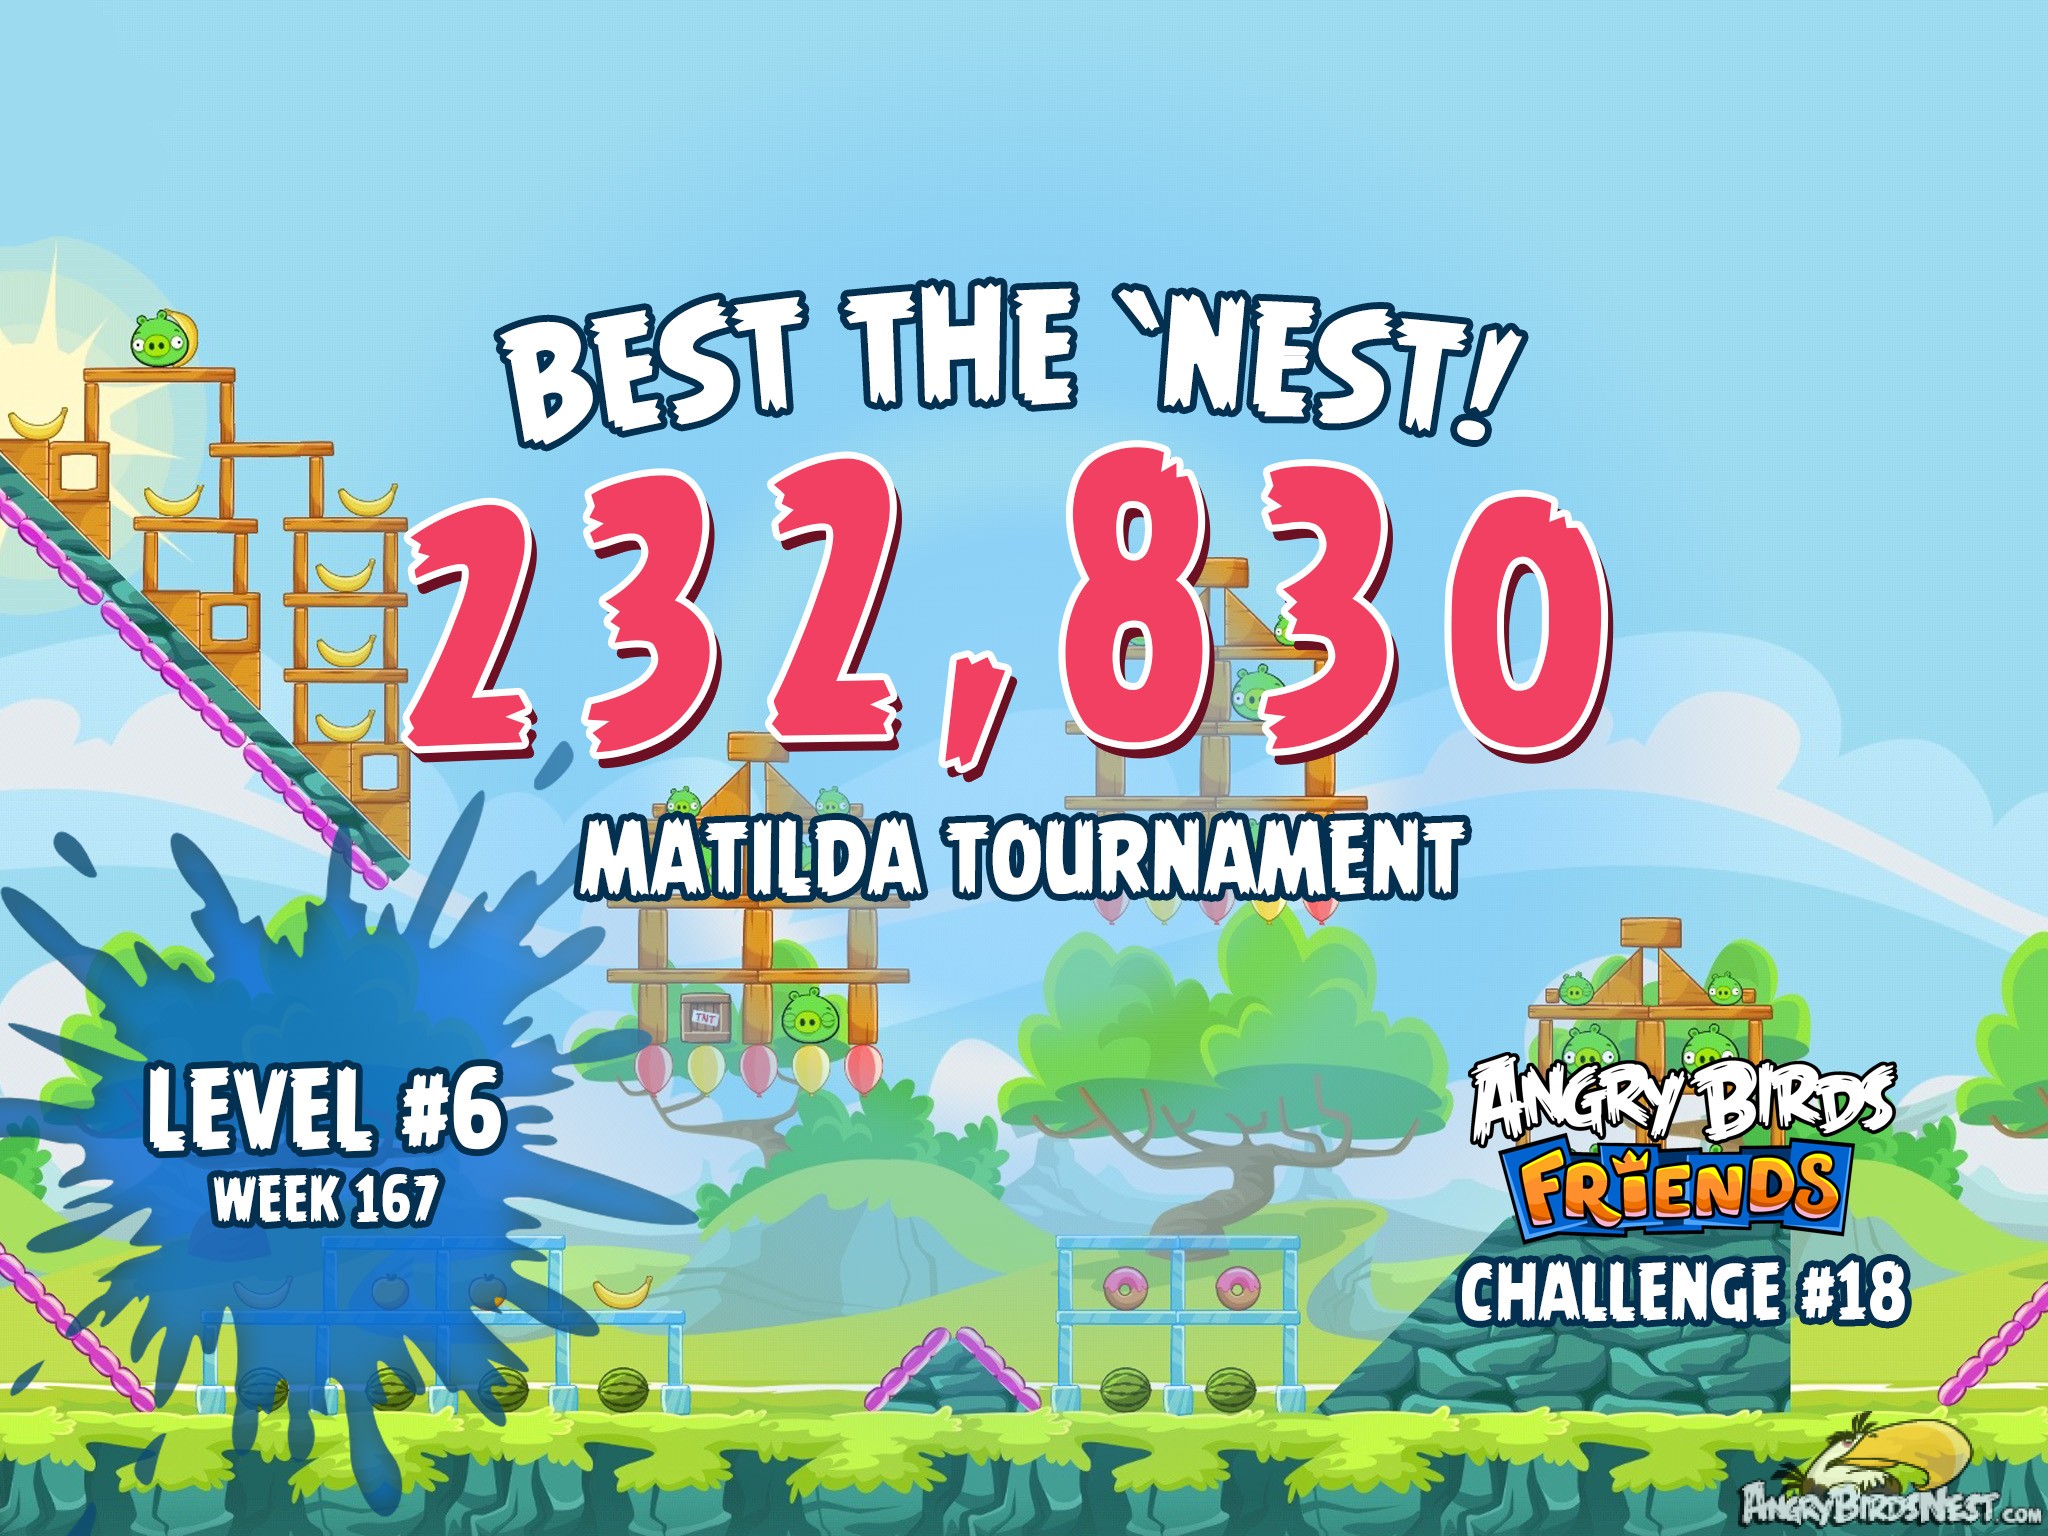 Angry Birds Friends Best the Nest Challenge Week 18